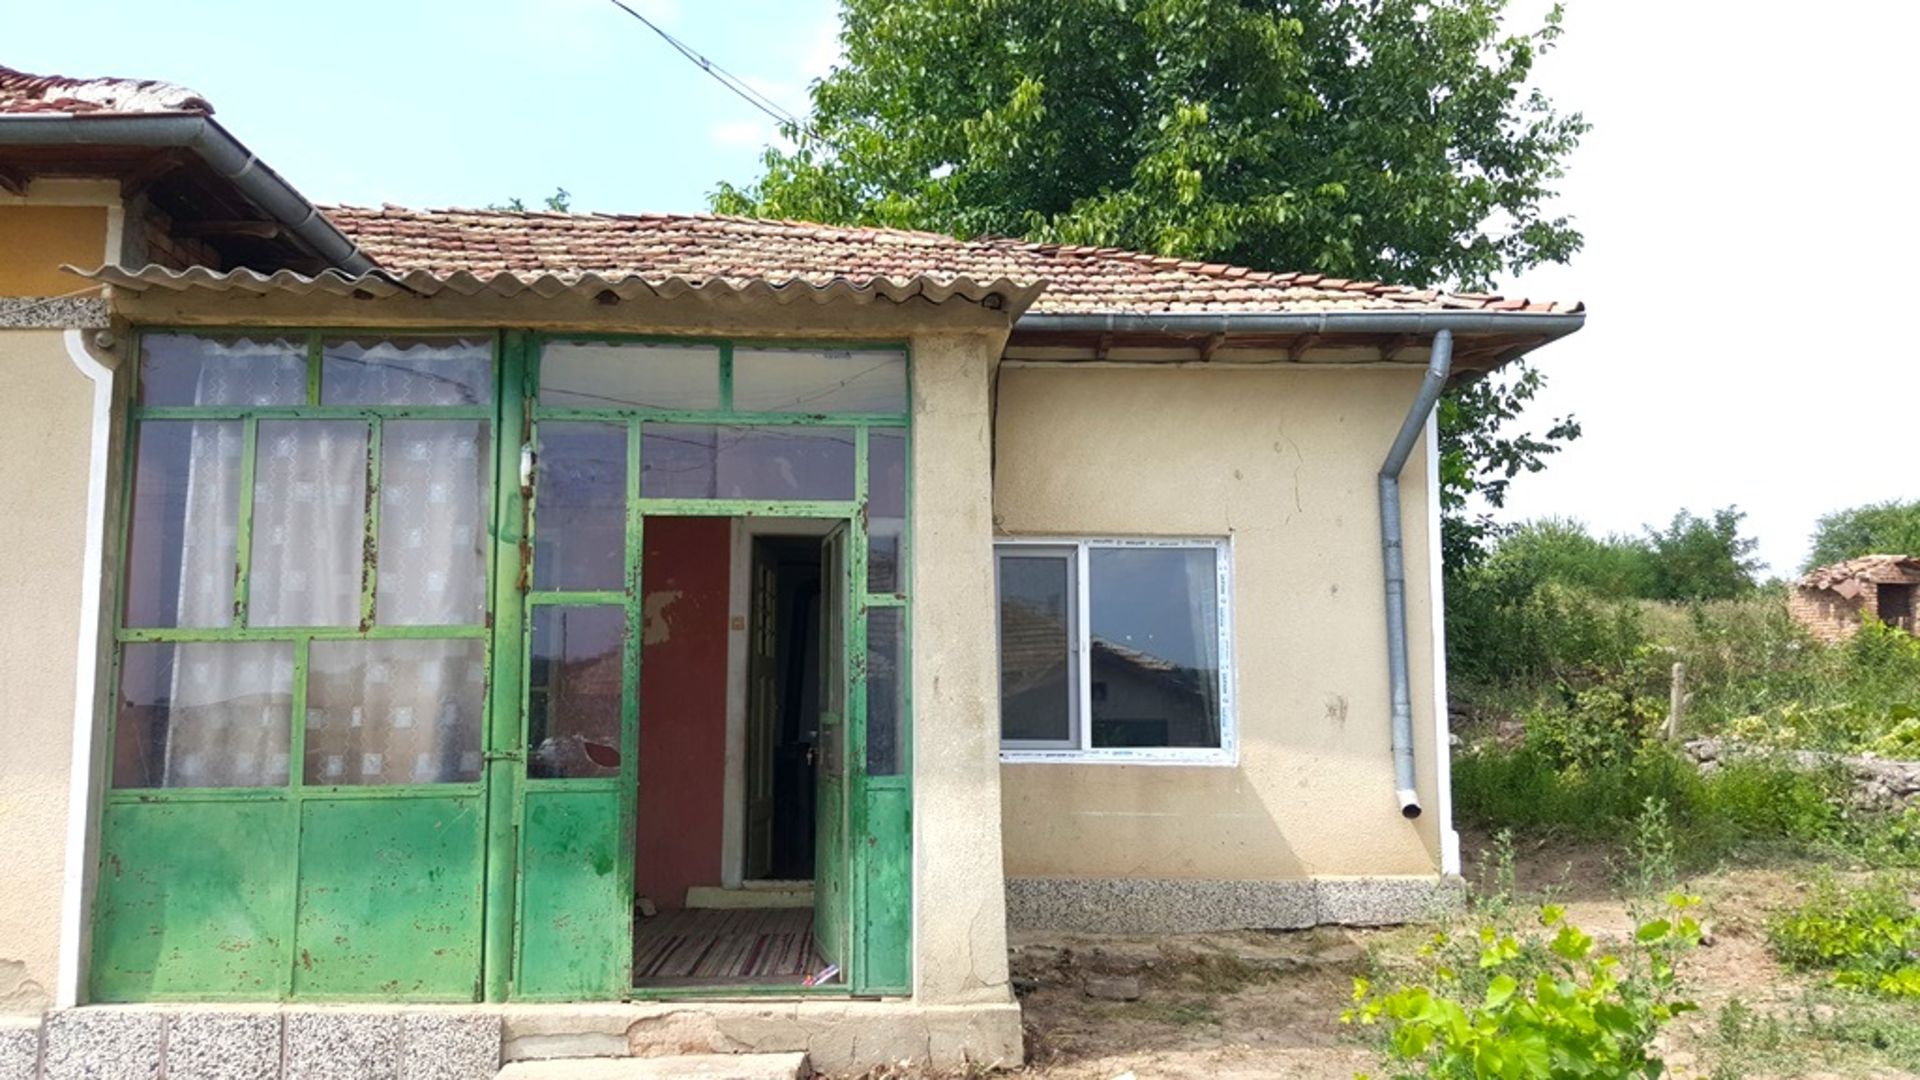 SUNFLOWER COTTAGE IN KRASEN, BULGARIA  - 30 miles from Beach! - Image 7 of 64